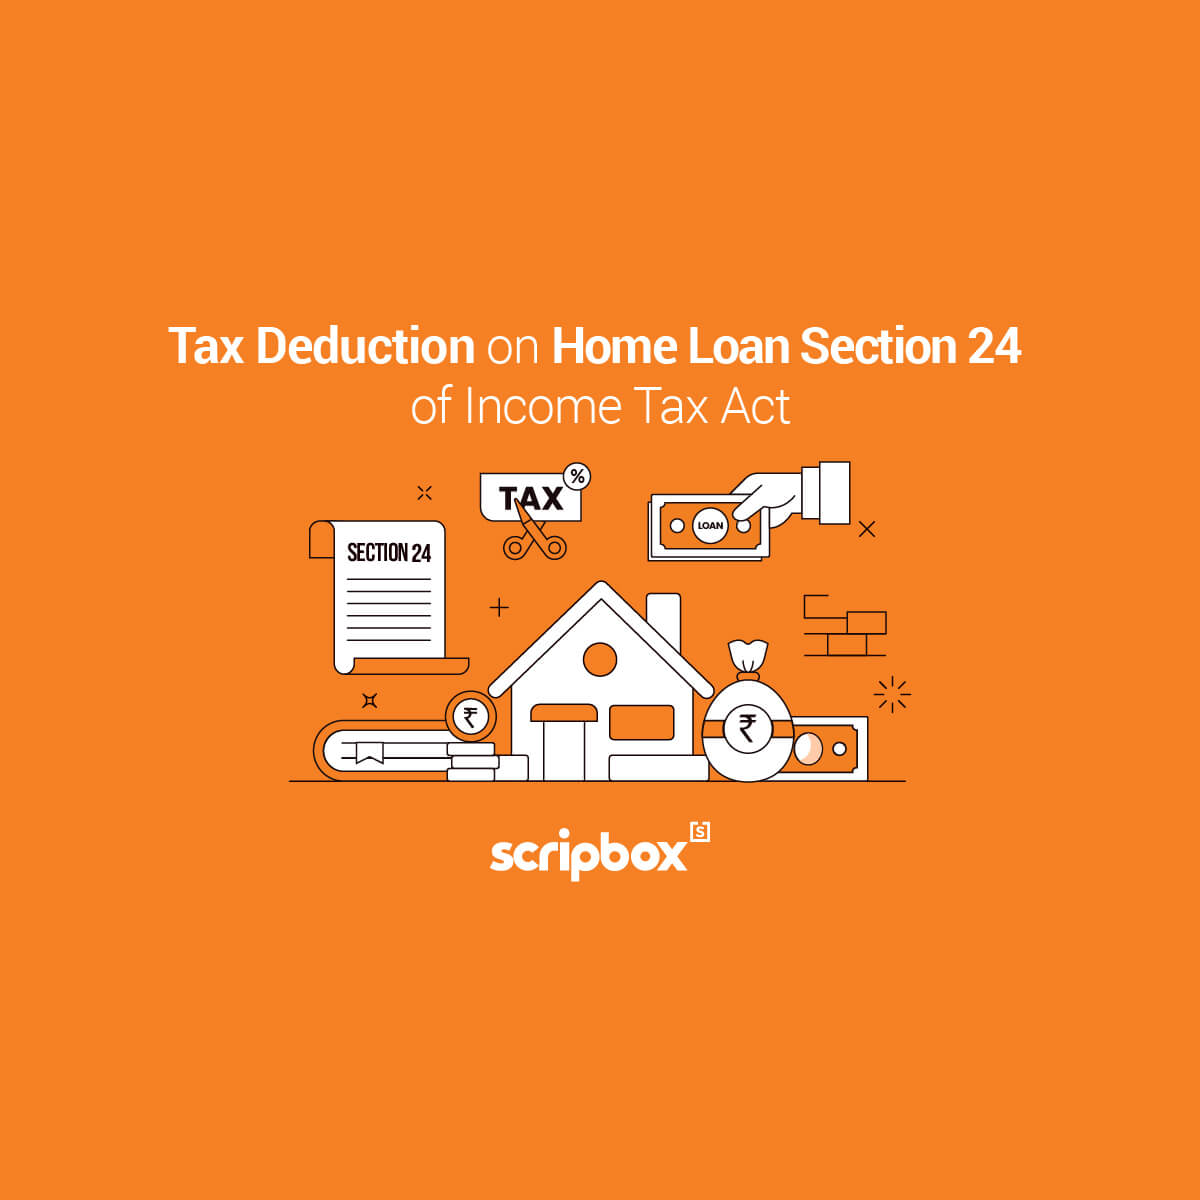 section-24-of-income-tax-act-deduction-for-interest-on-home-loan